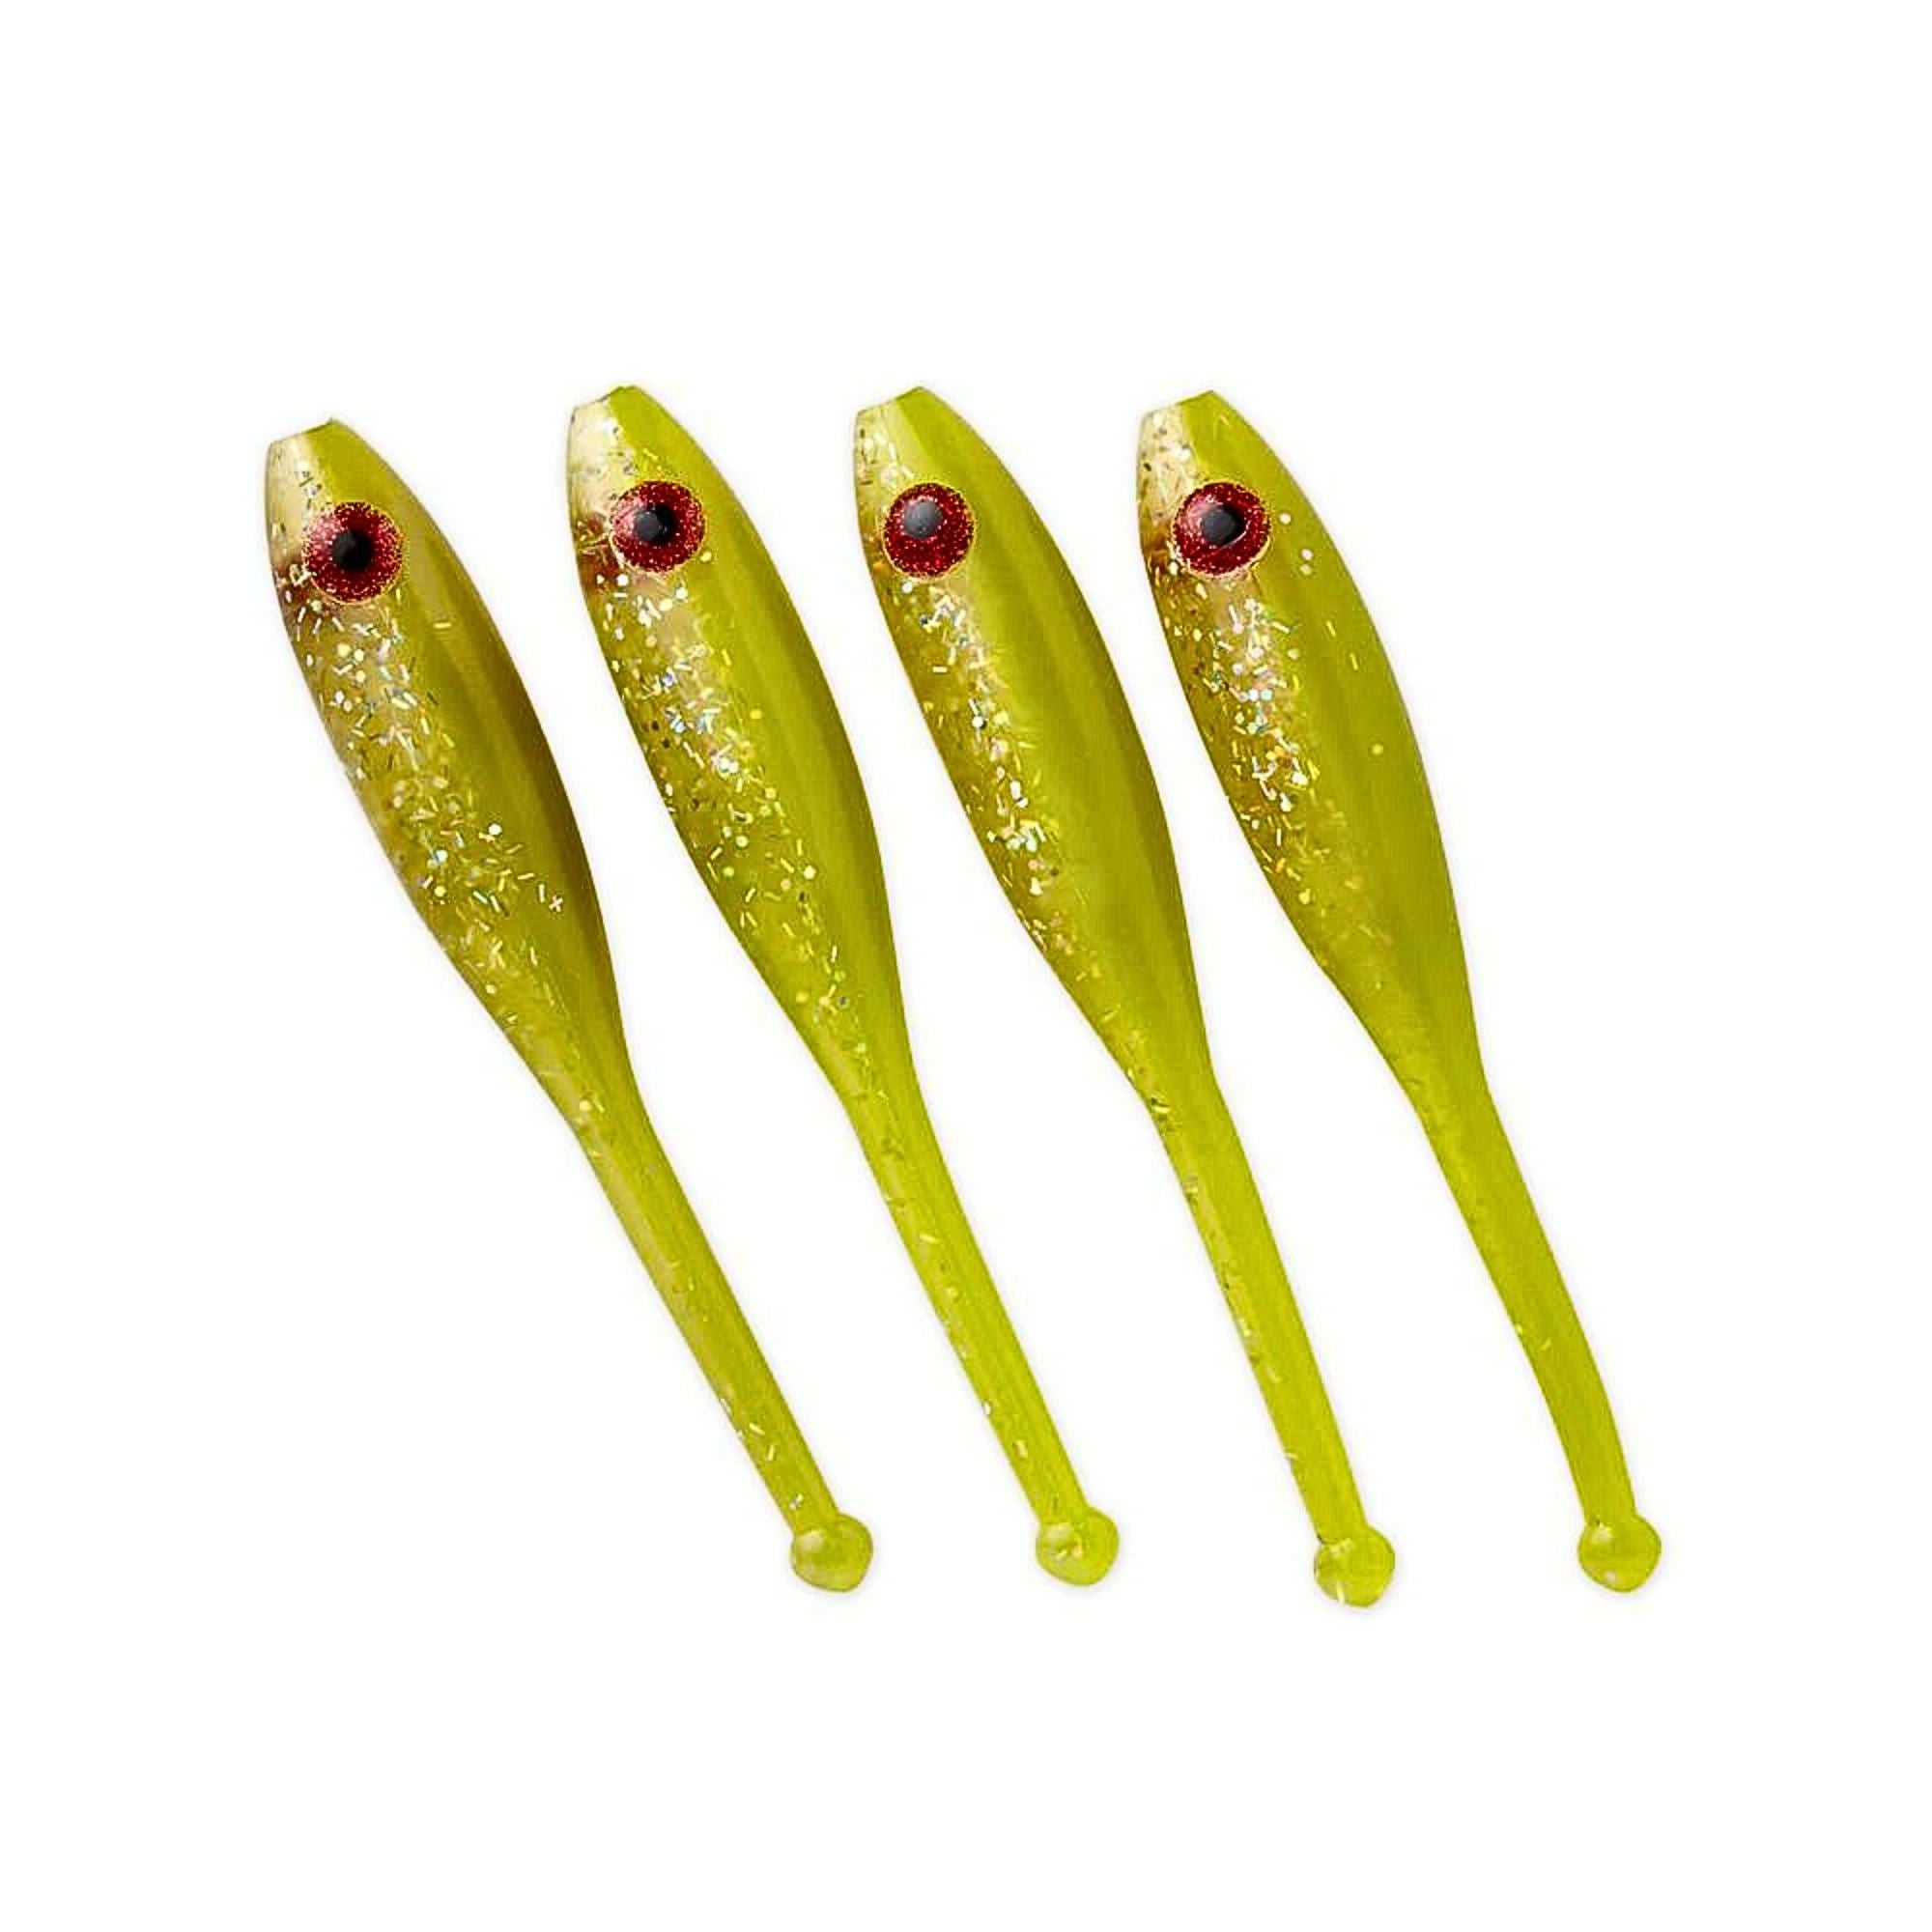 The Slick Jerk Bait, Pure Flats, Lures, Tackle